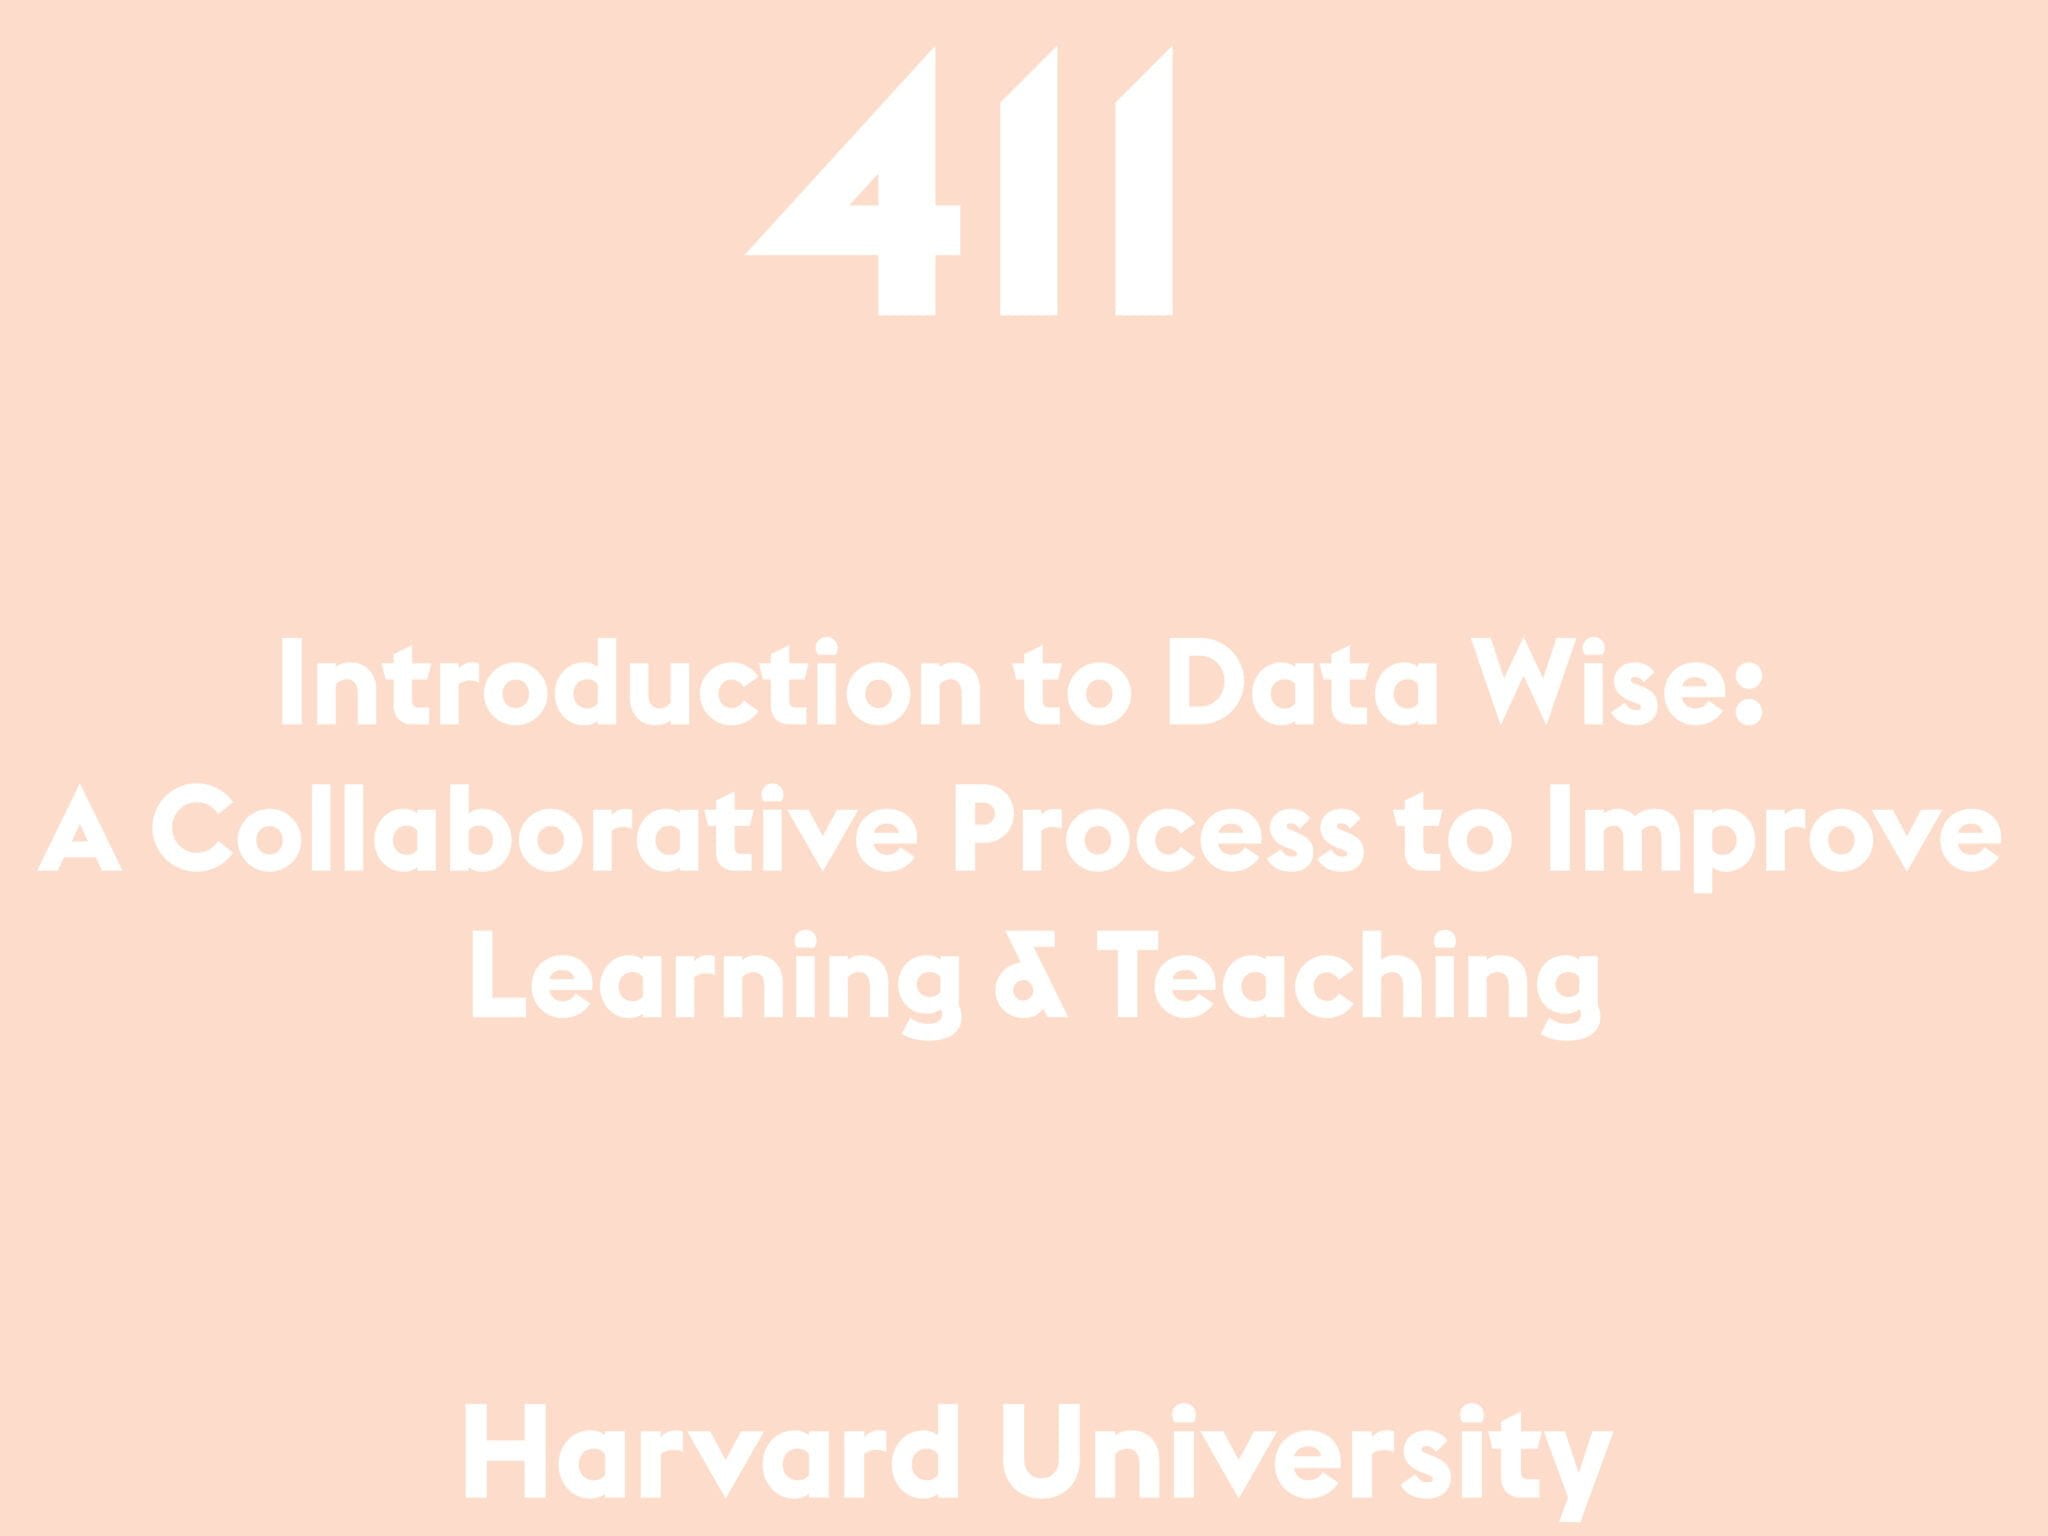 Introduction to Data Wise: A Collaborative Process to Improve Learning & Teaching